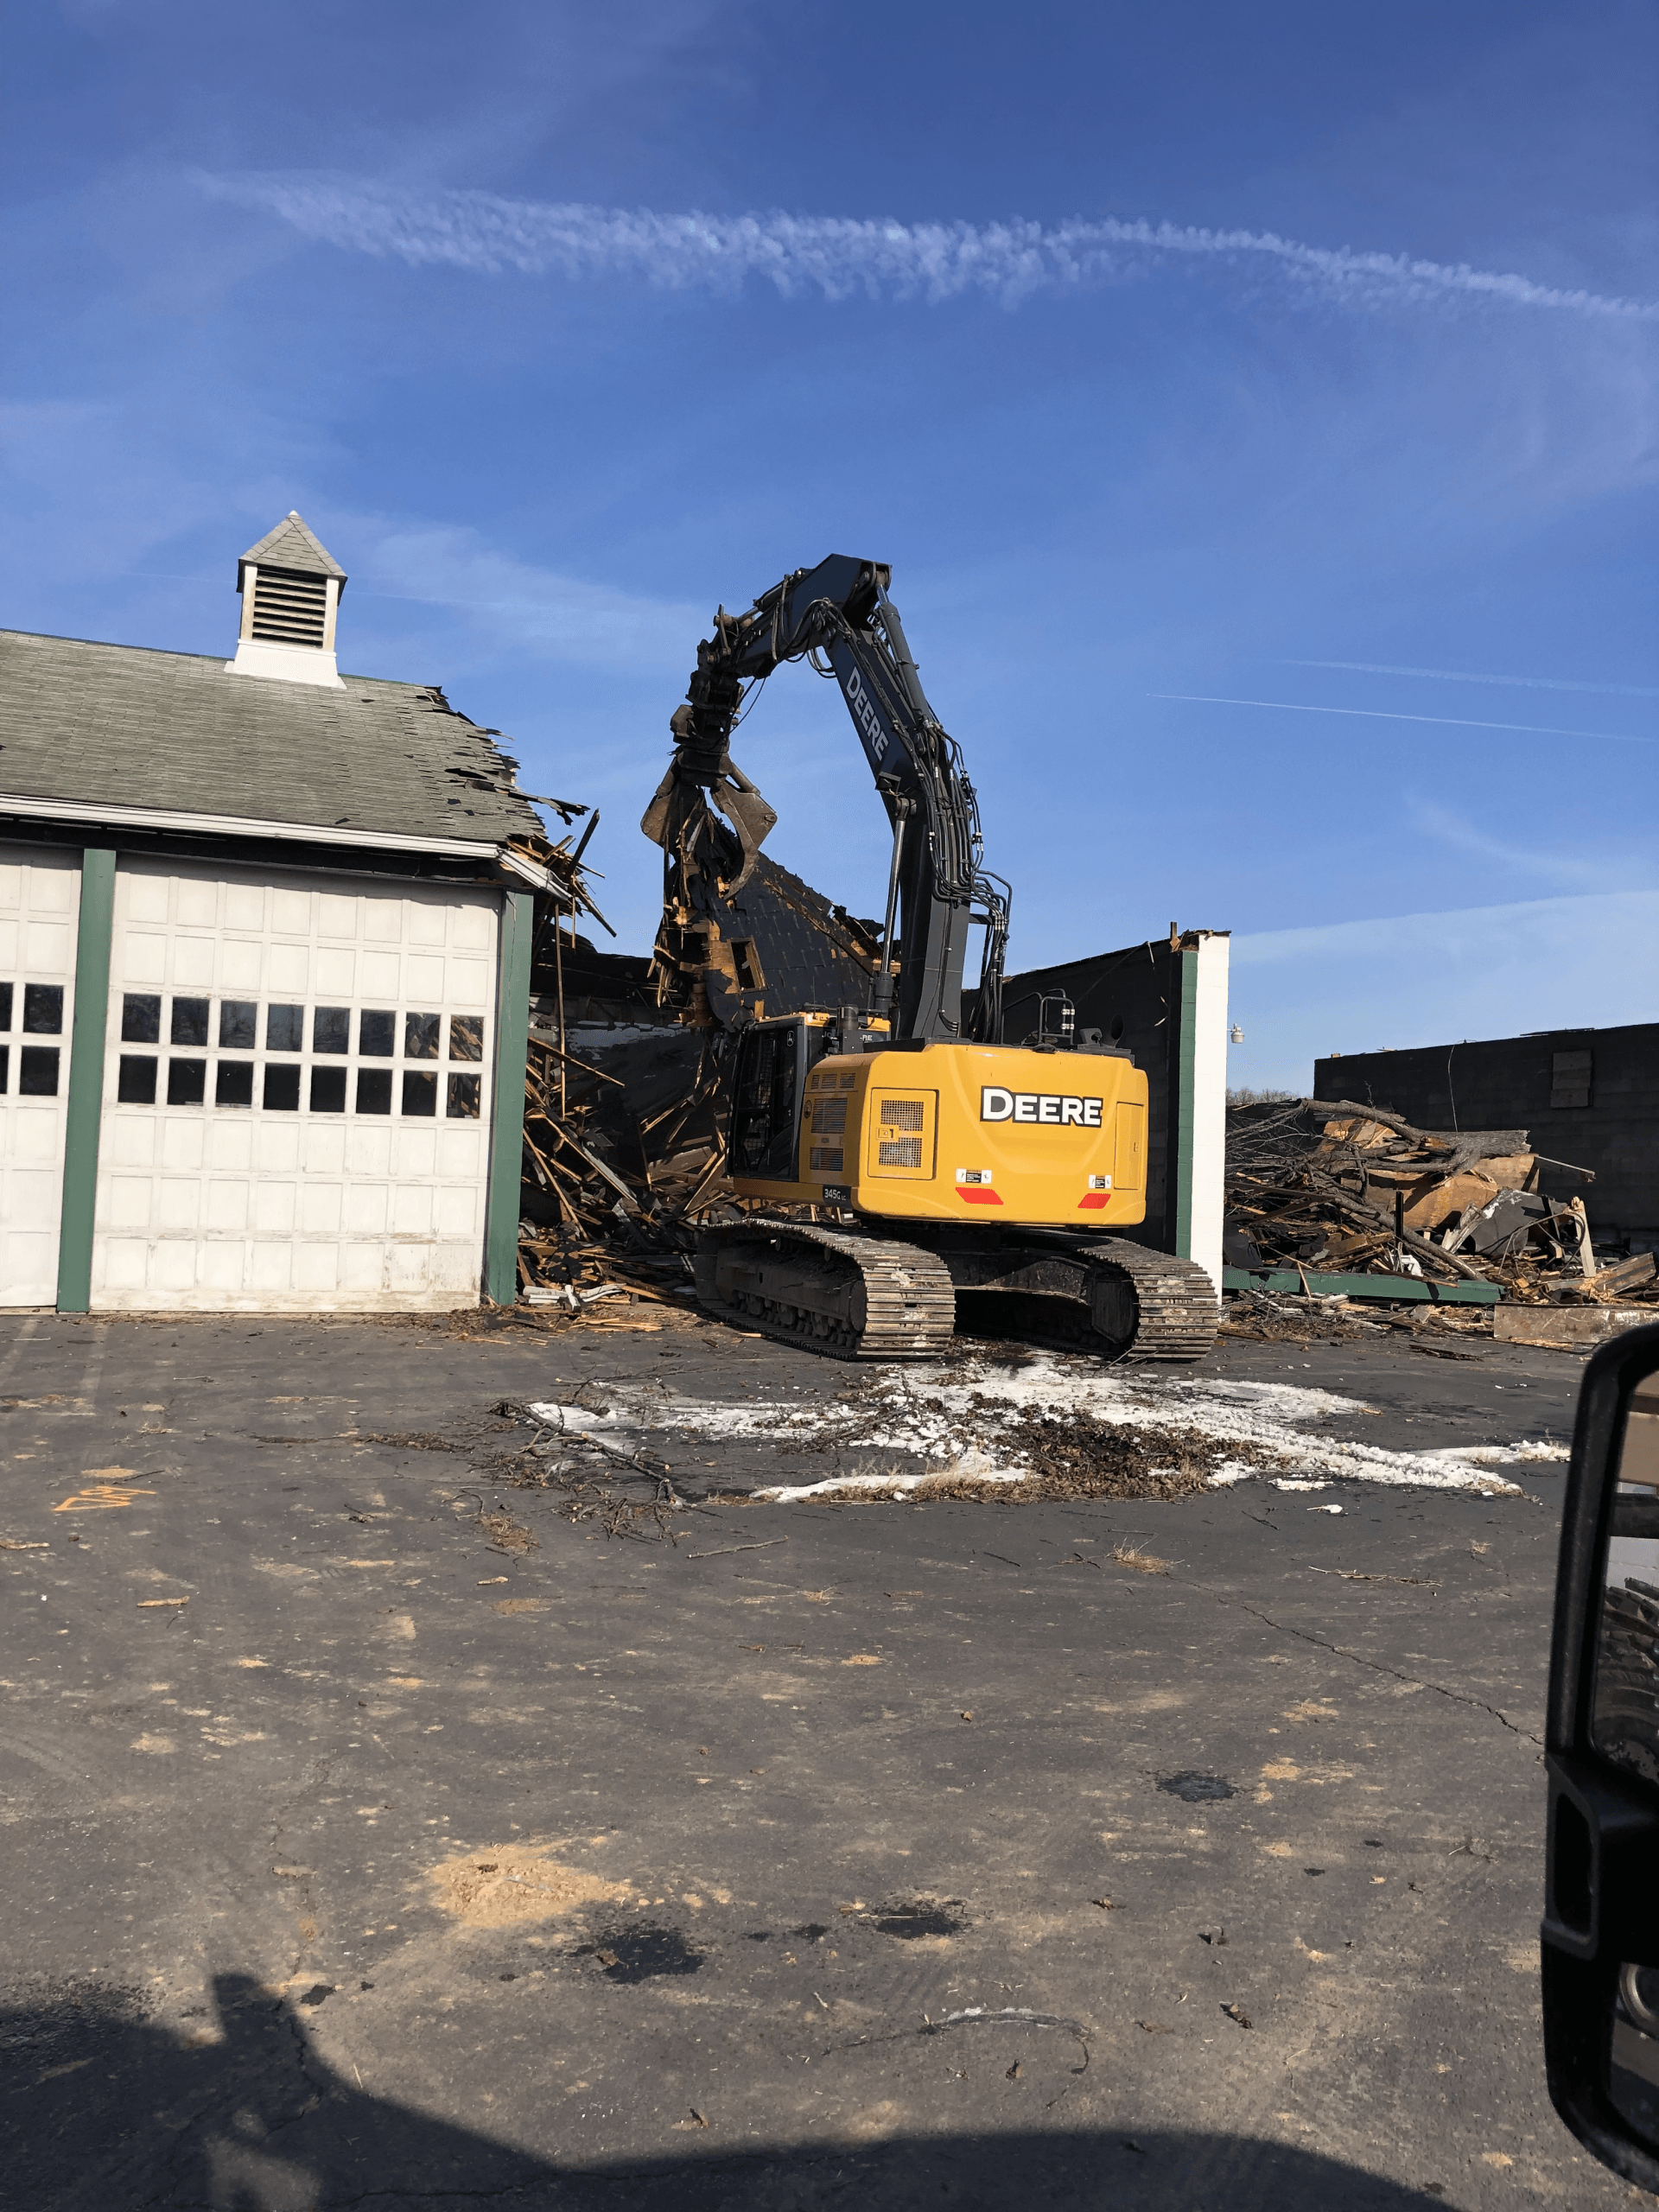 A large excavator is demolishing a building in a parking lot.